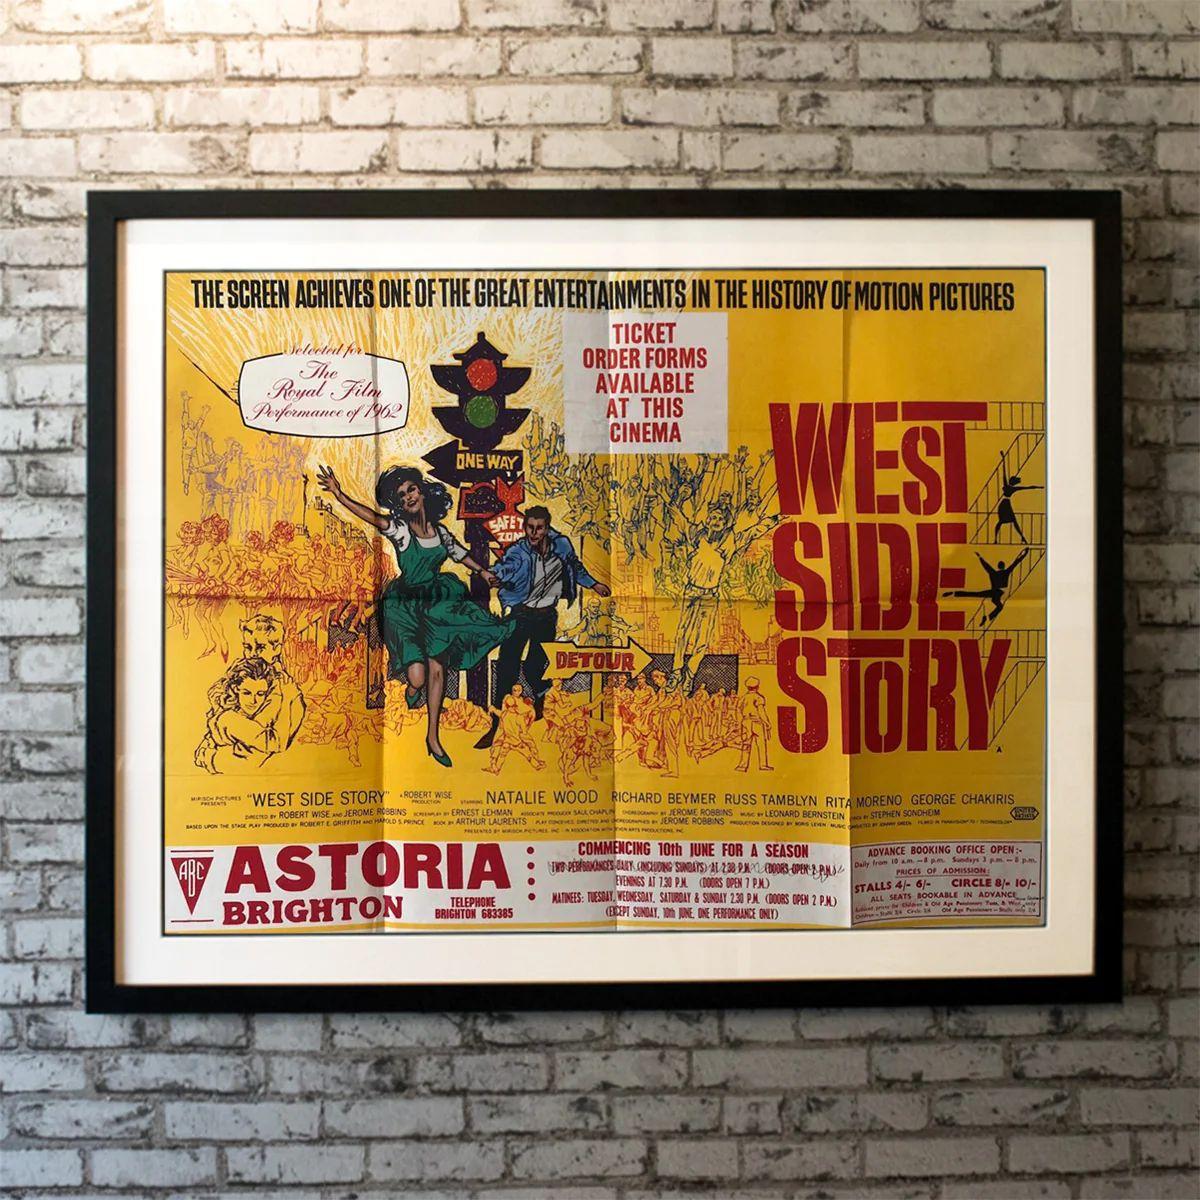 West Side Story, Unframed Poster, 1962

Original British Quad (30 X 40 Inches). Two youngsters from rival New York City gangs fall in love, but tensions between their respective friends build toward tragedy.

Additional Information:
Year: